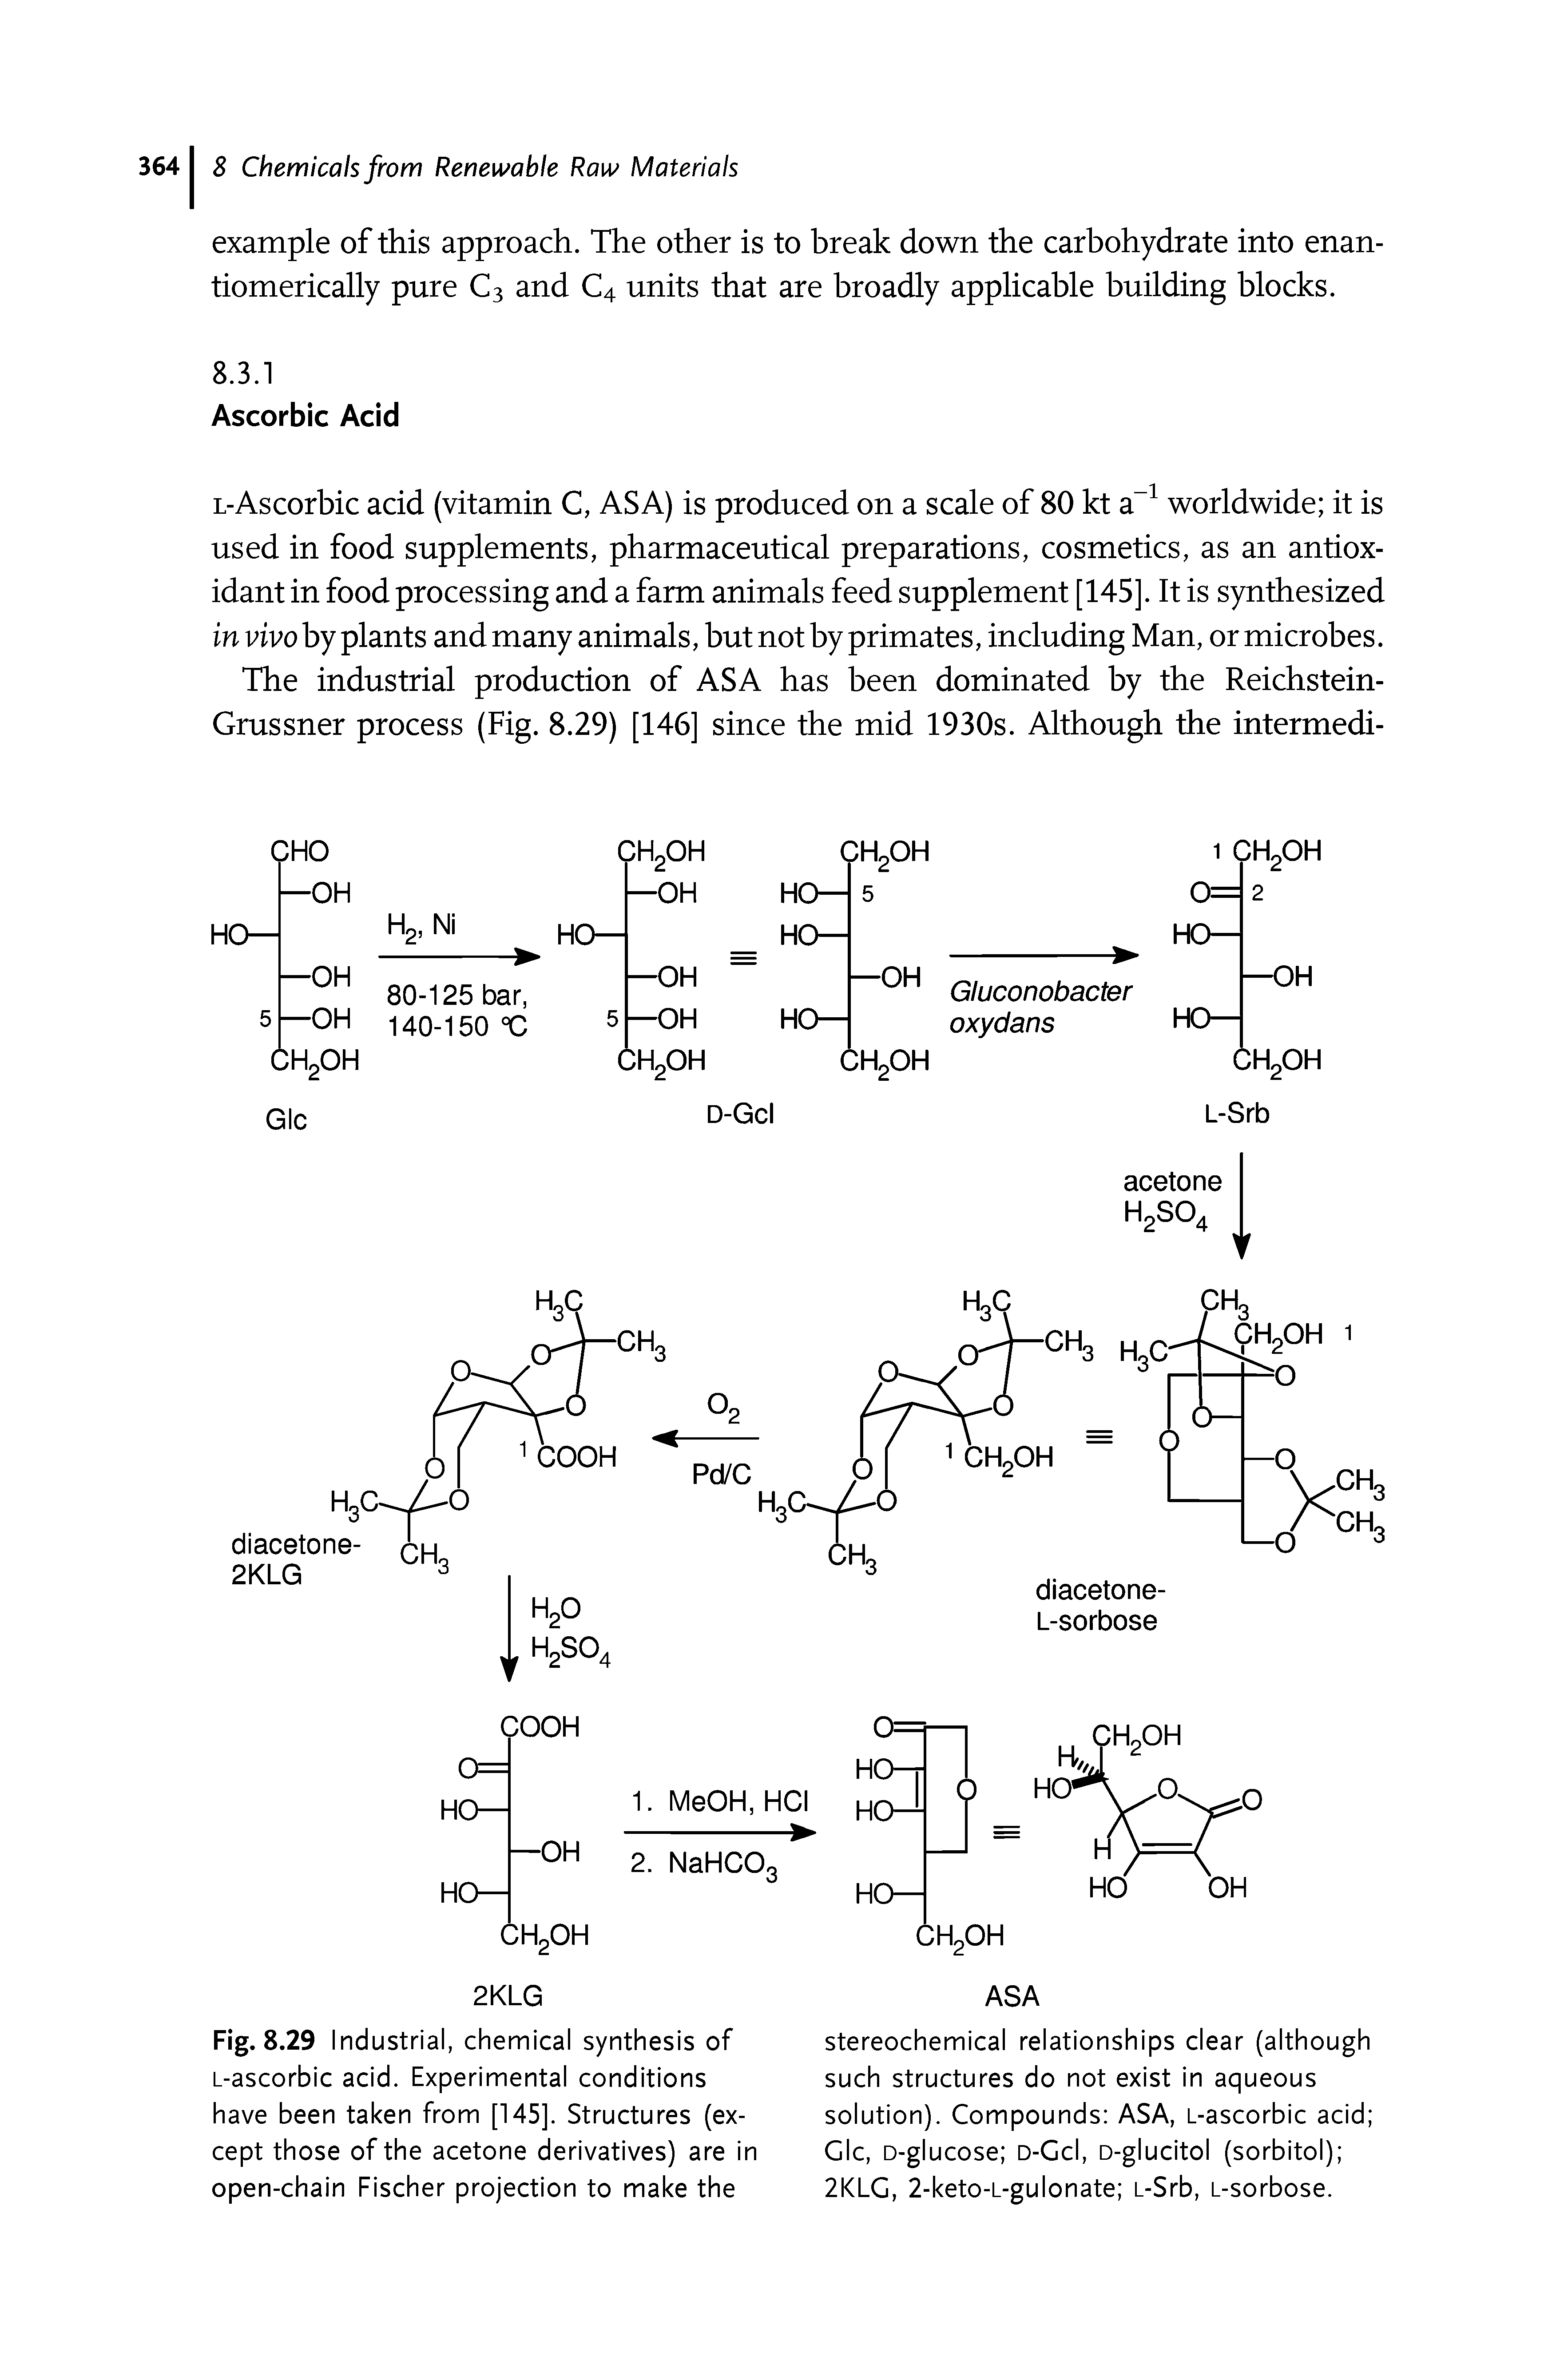 Fig. 8.29 Industrial, chemical synthesis of L-ascorbic acid. Experimental conditions have been taken from [145]. Structures (except those of the acetone derivatives) are in open-chain Fischer projection to make the...